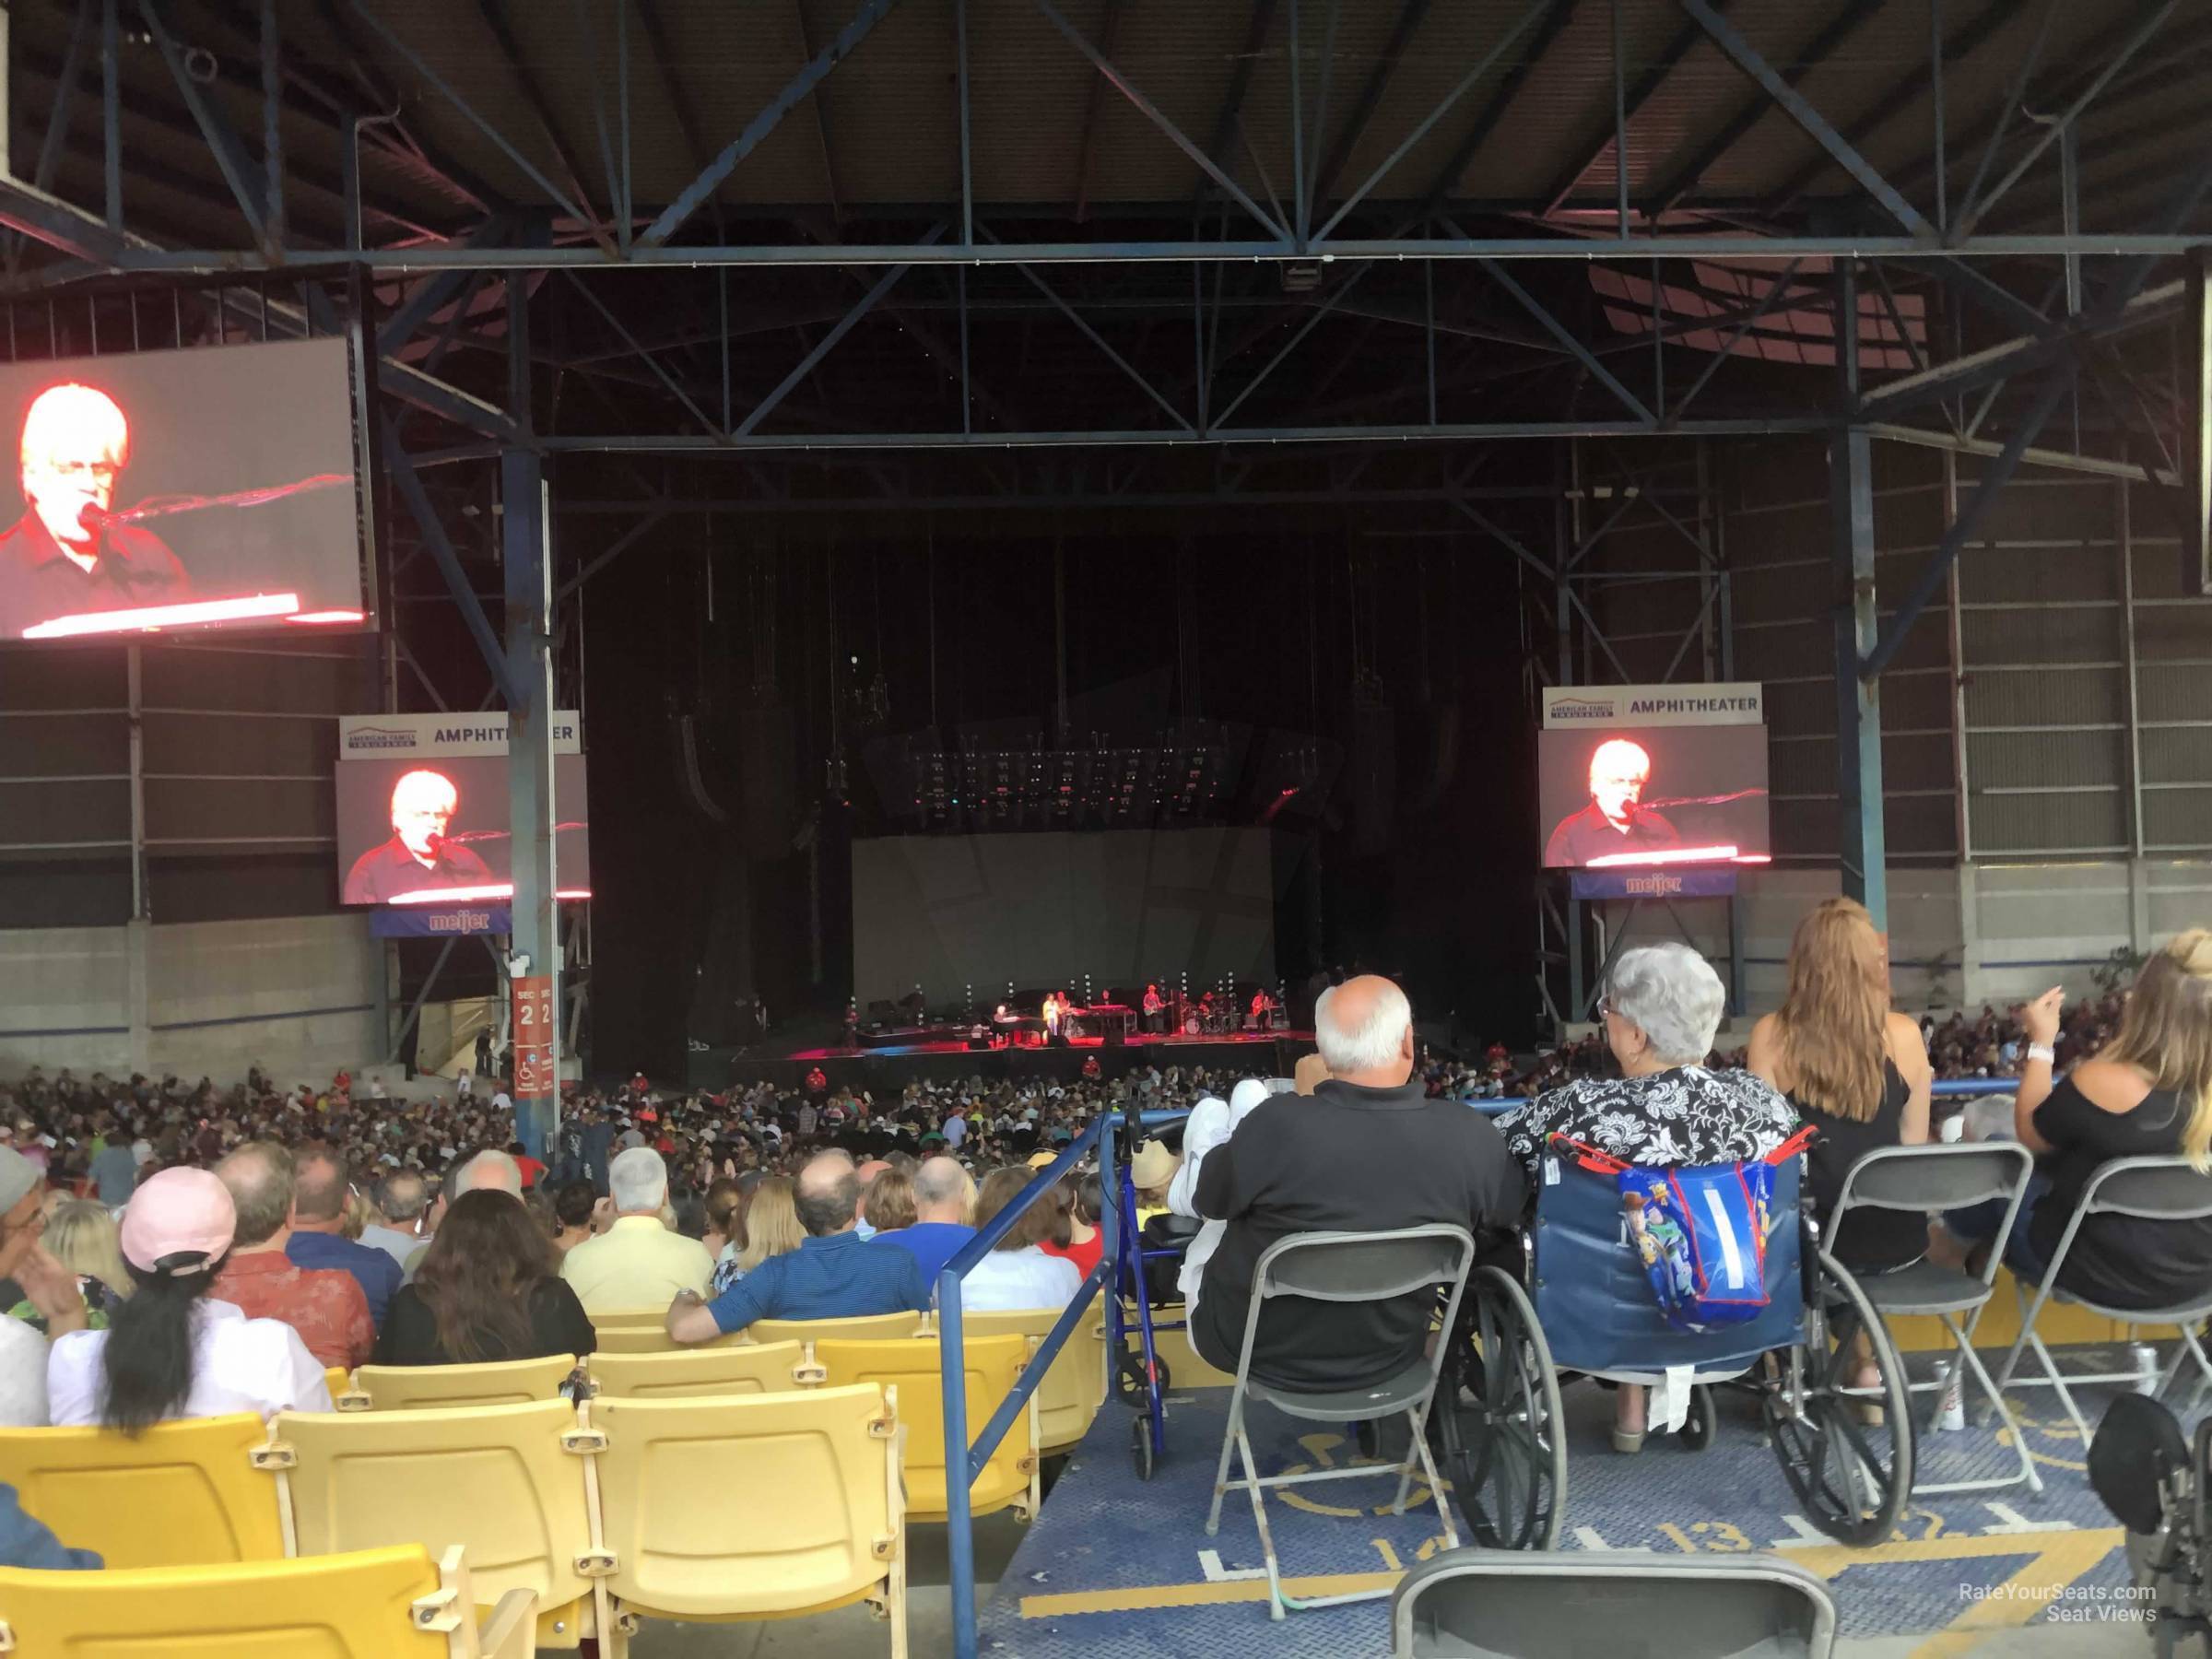 section 206, row y seat view  - american family insurance amphitheater